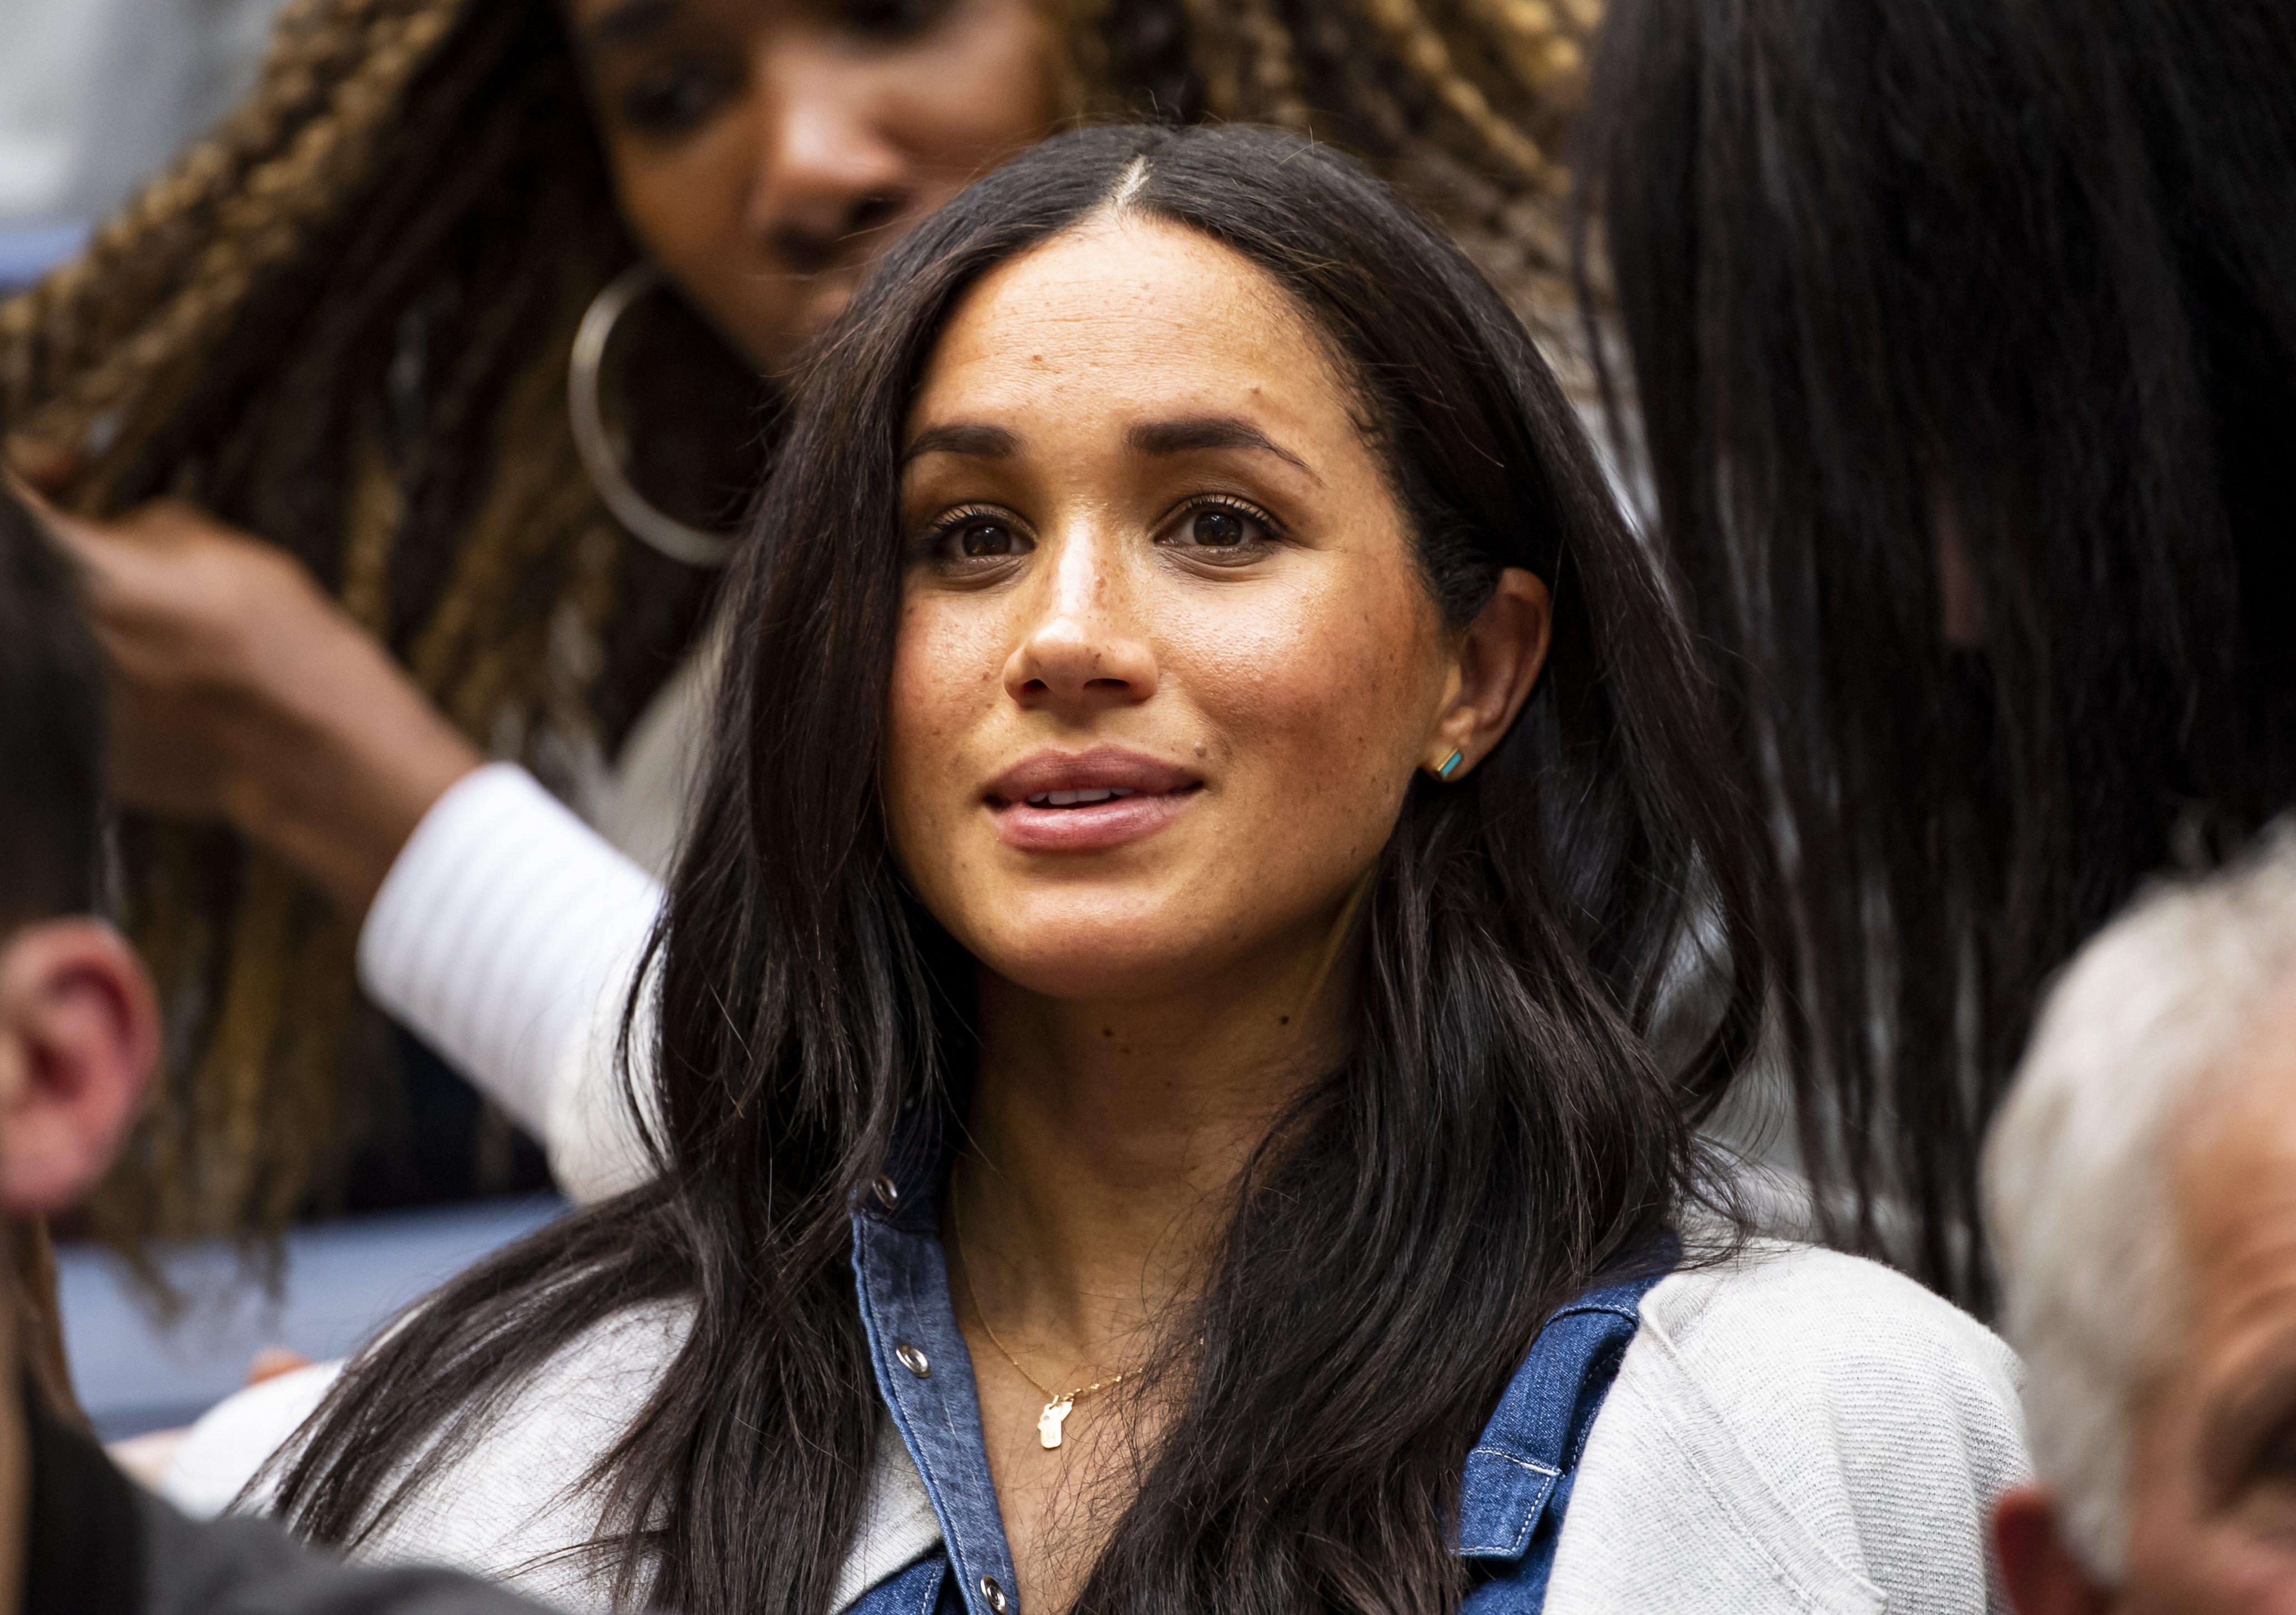 Megan Markle watches Serena Williams against Bianca Andreescu  at US Open on September 07, 2019 | Photo: GettyImages